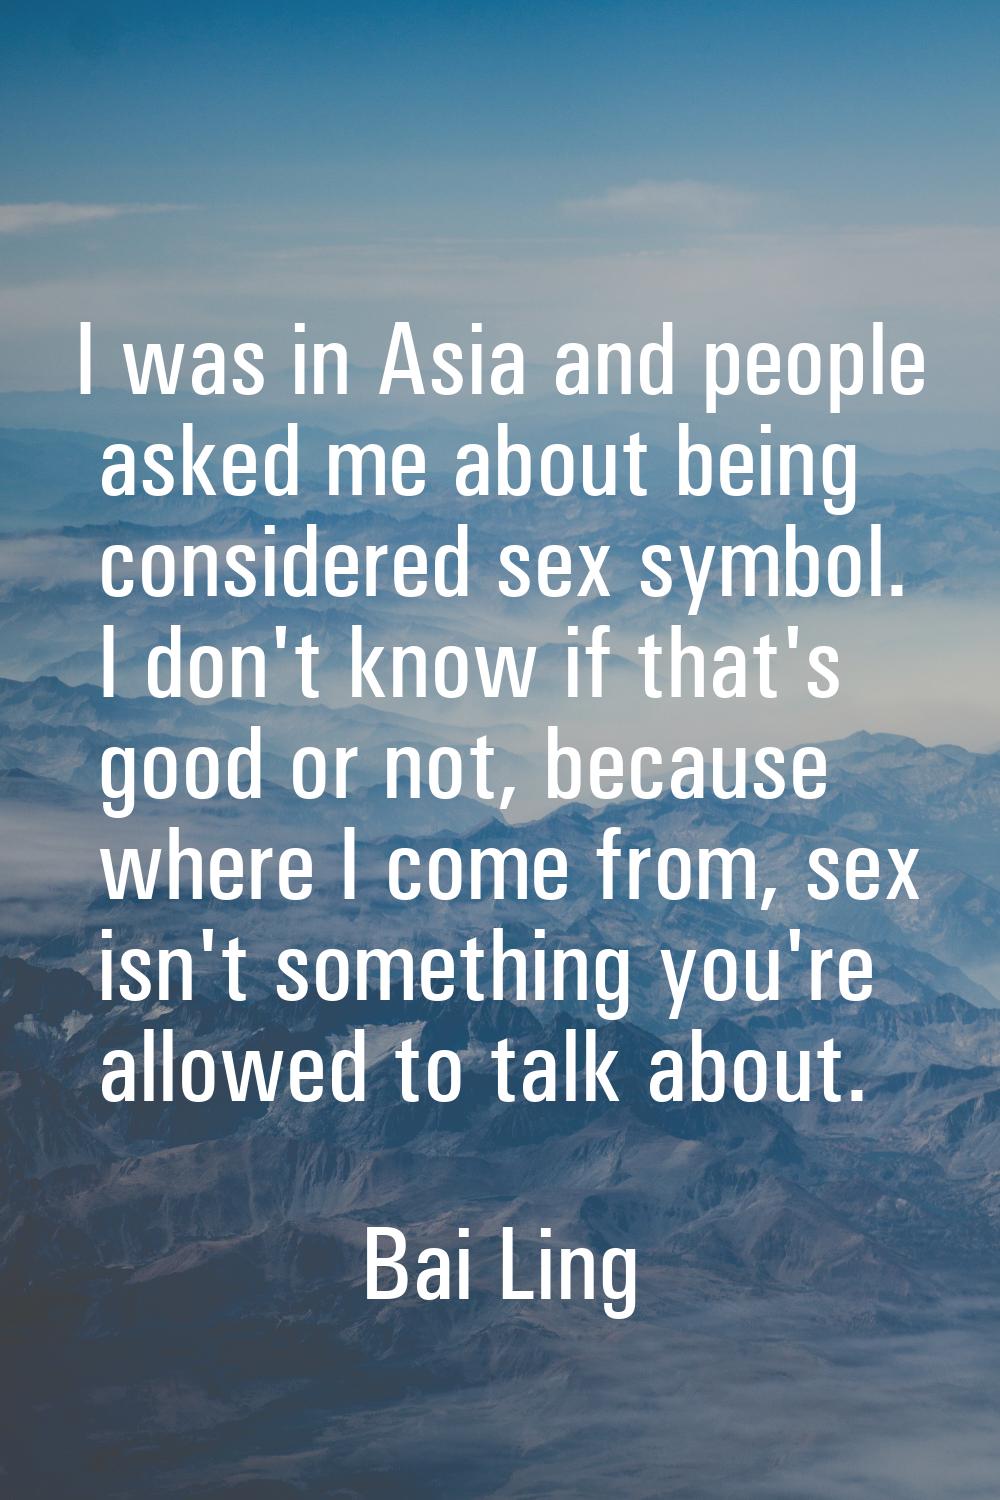 I was in Asia and people asked me about being considered sex symbol. I don't know if that's good or